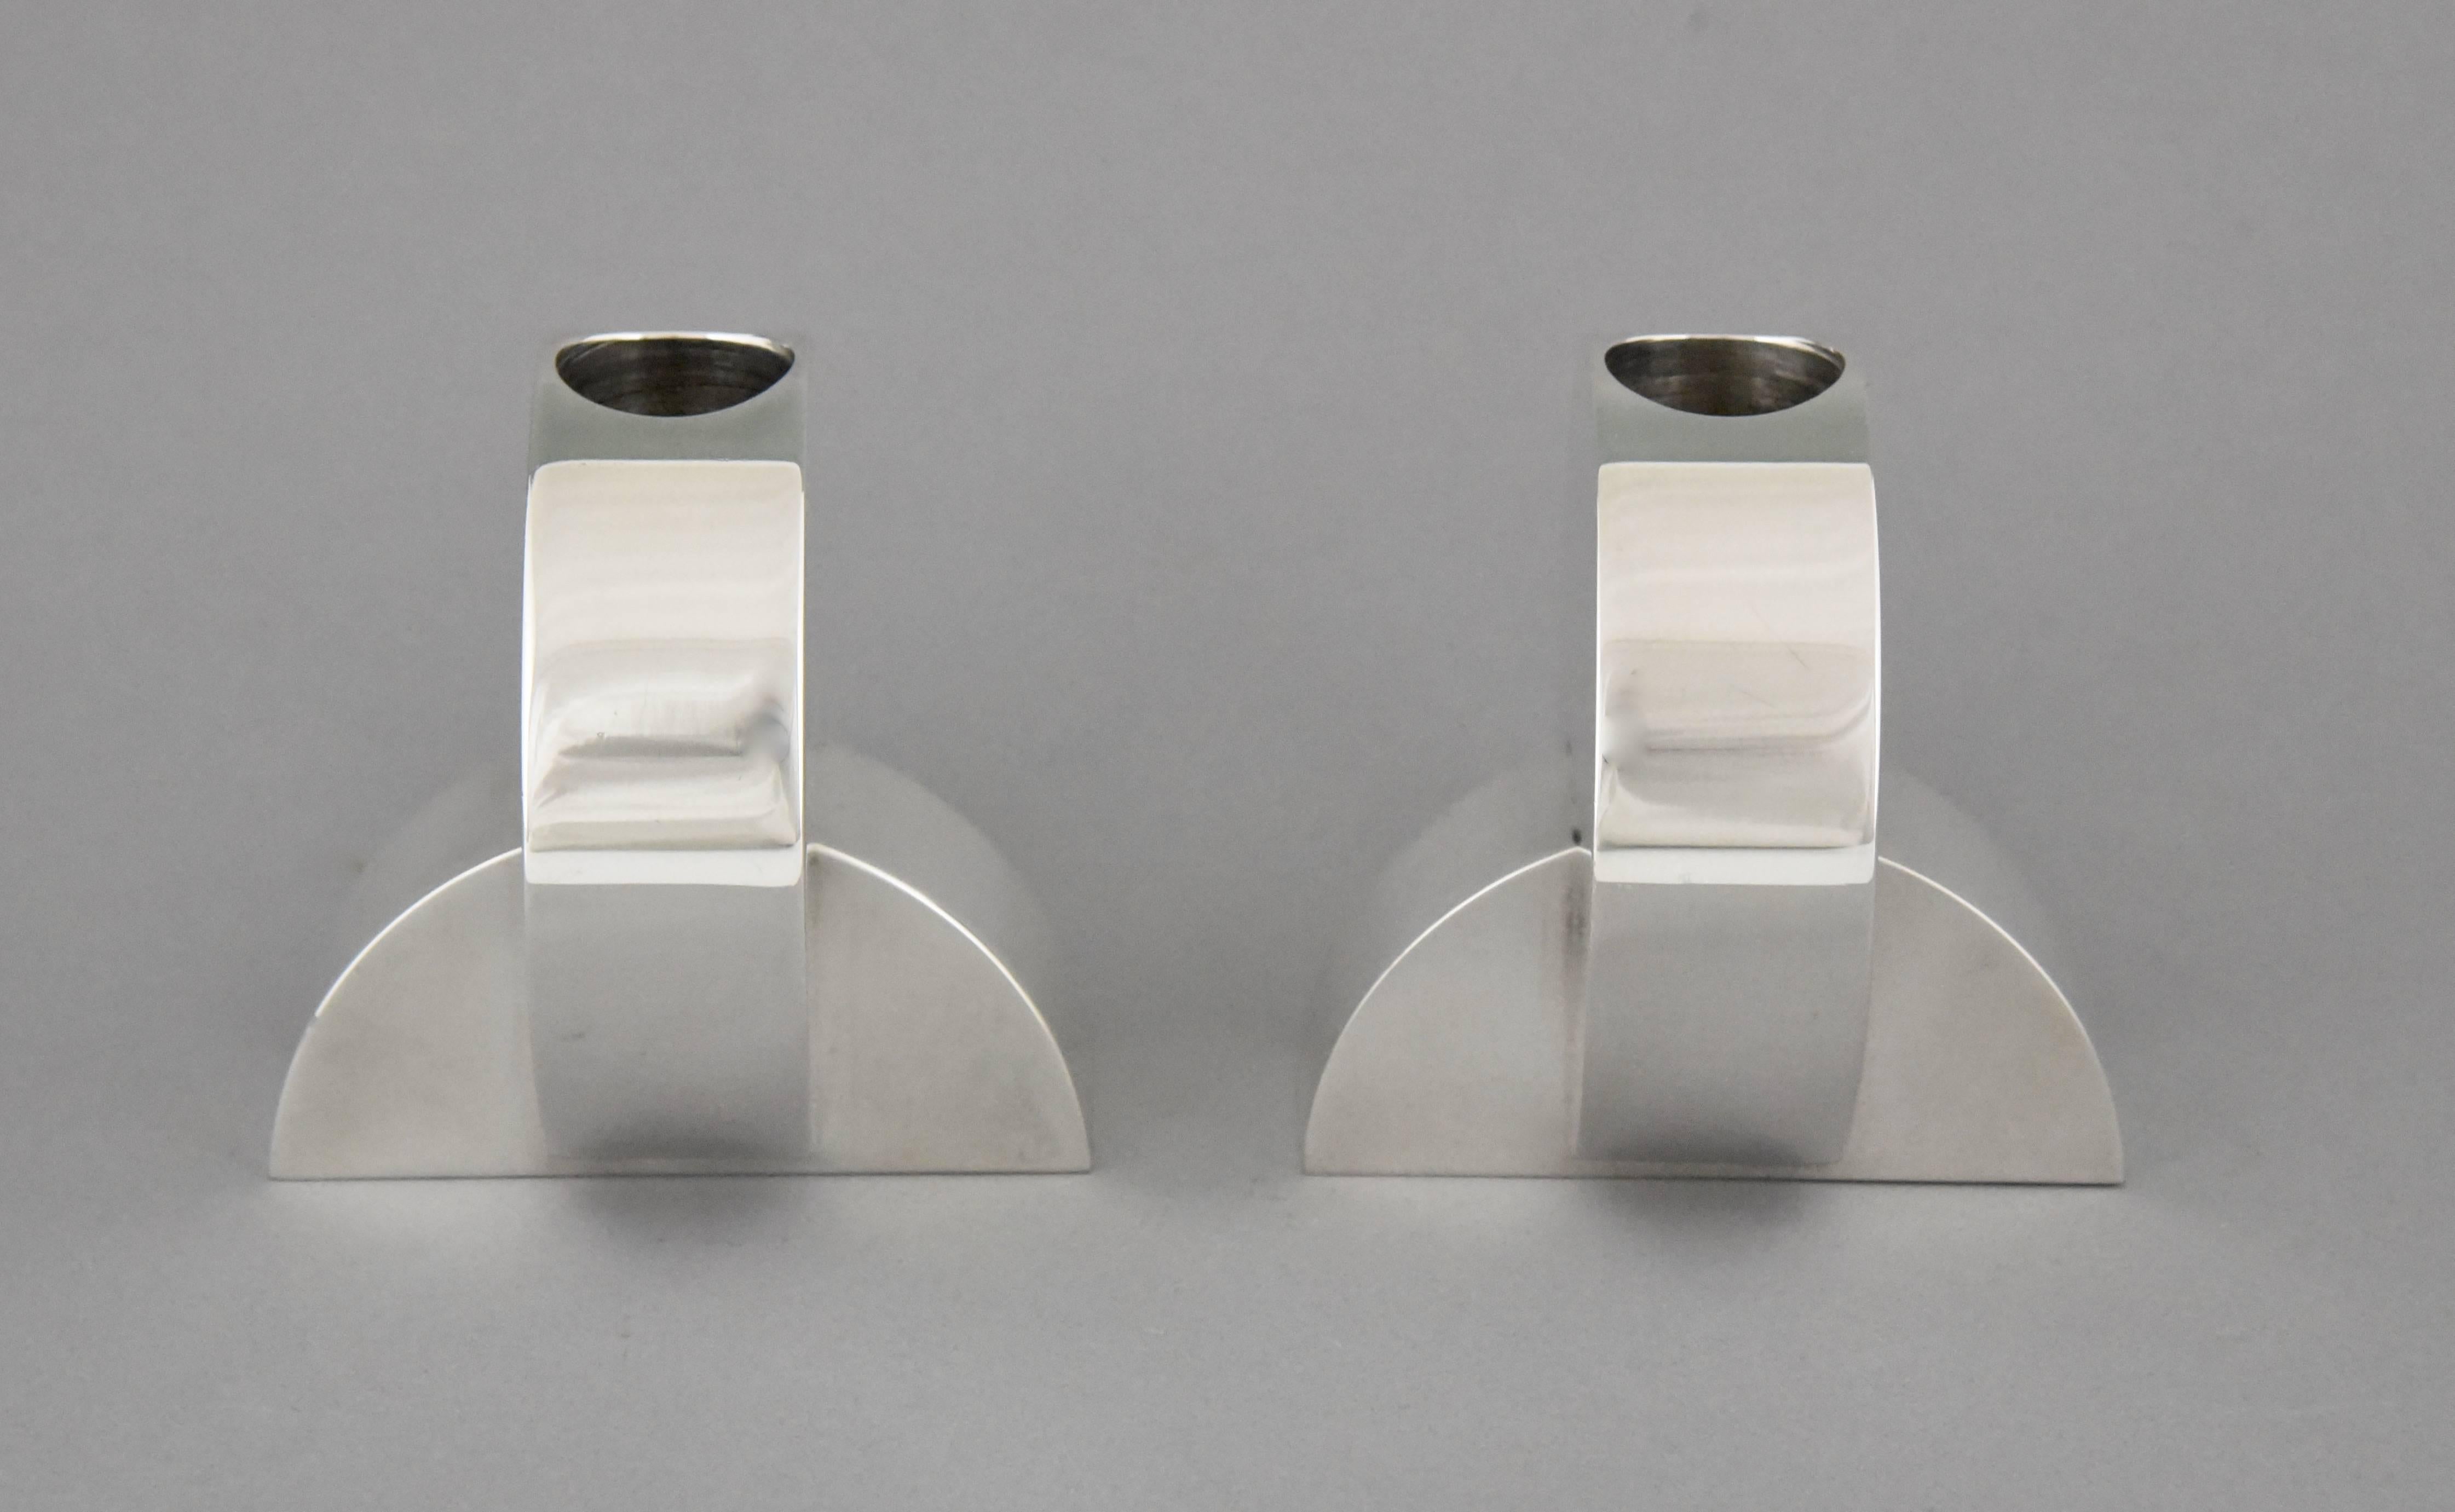 20th Century Art Deco Modernist Pair of Silvered Candlesticks by Ercuis 1925 France